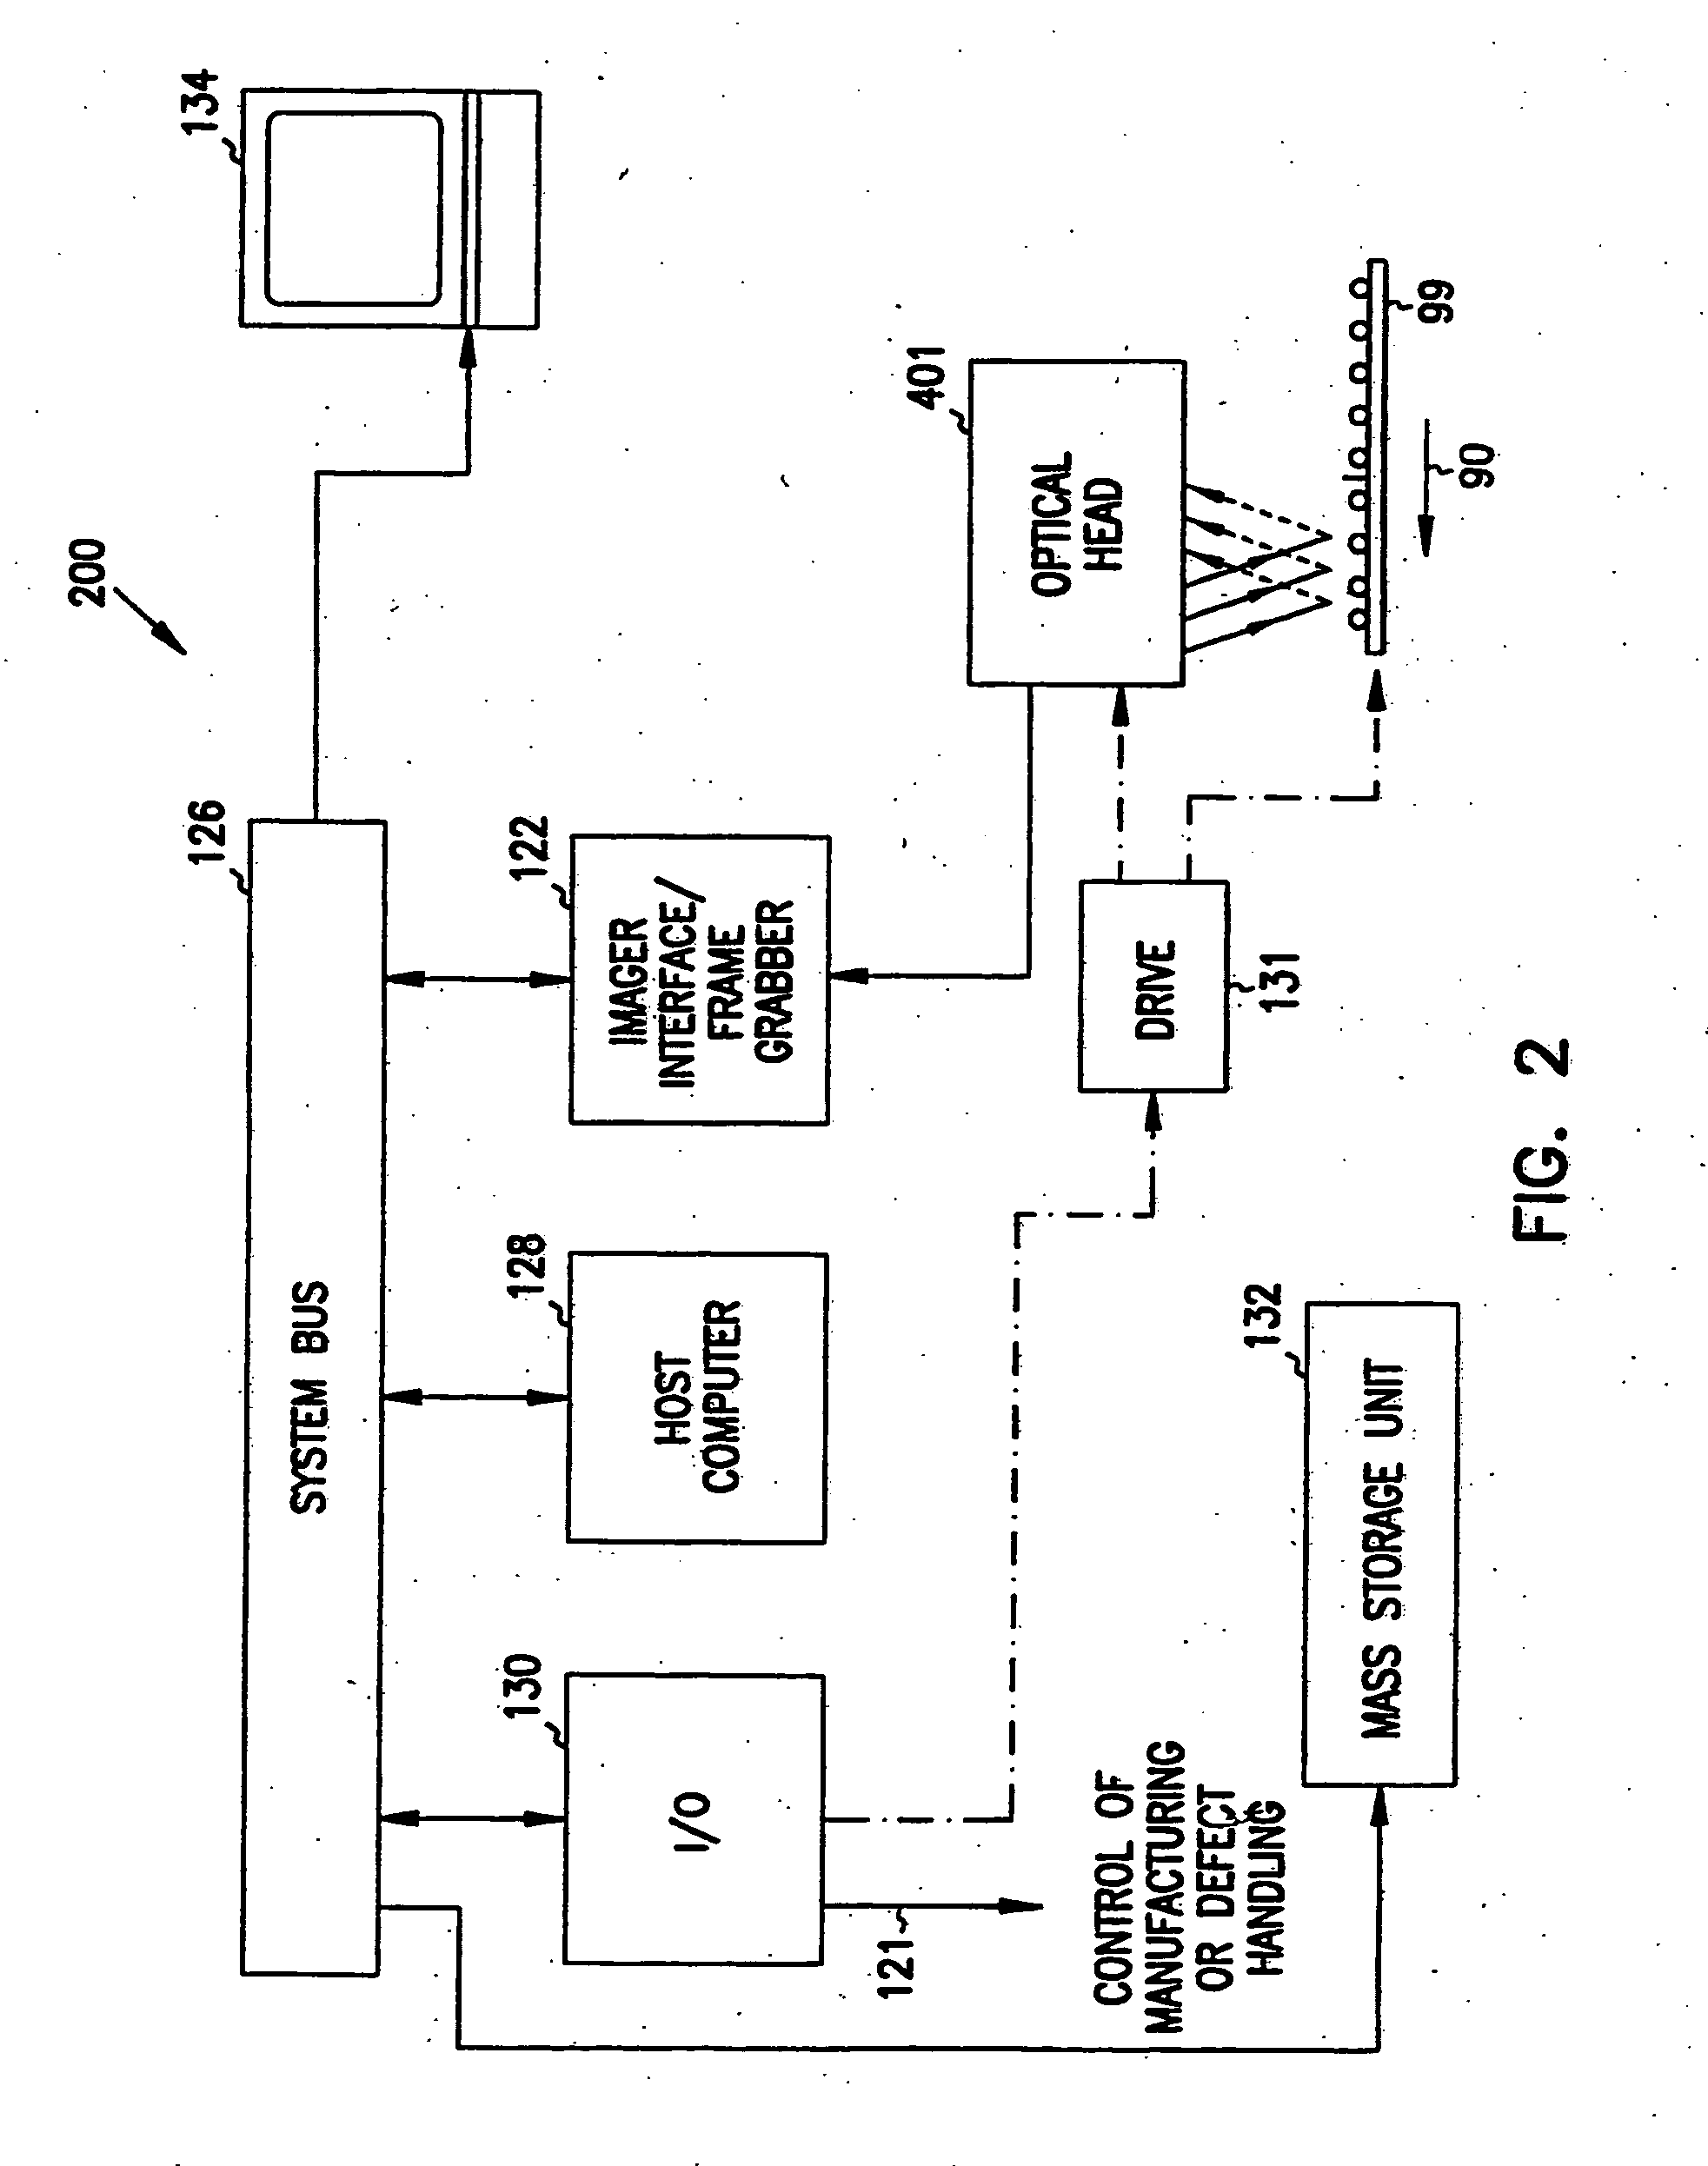 Parts manipulation and inspection system and method